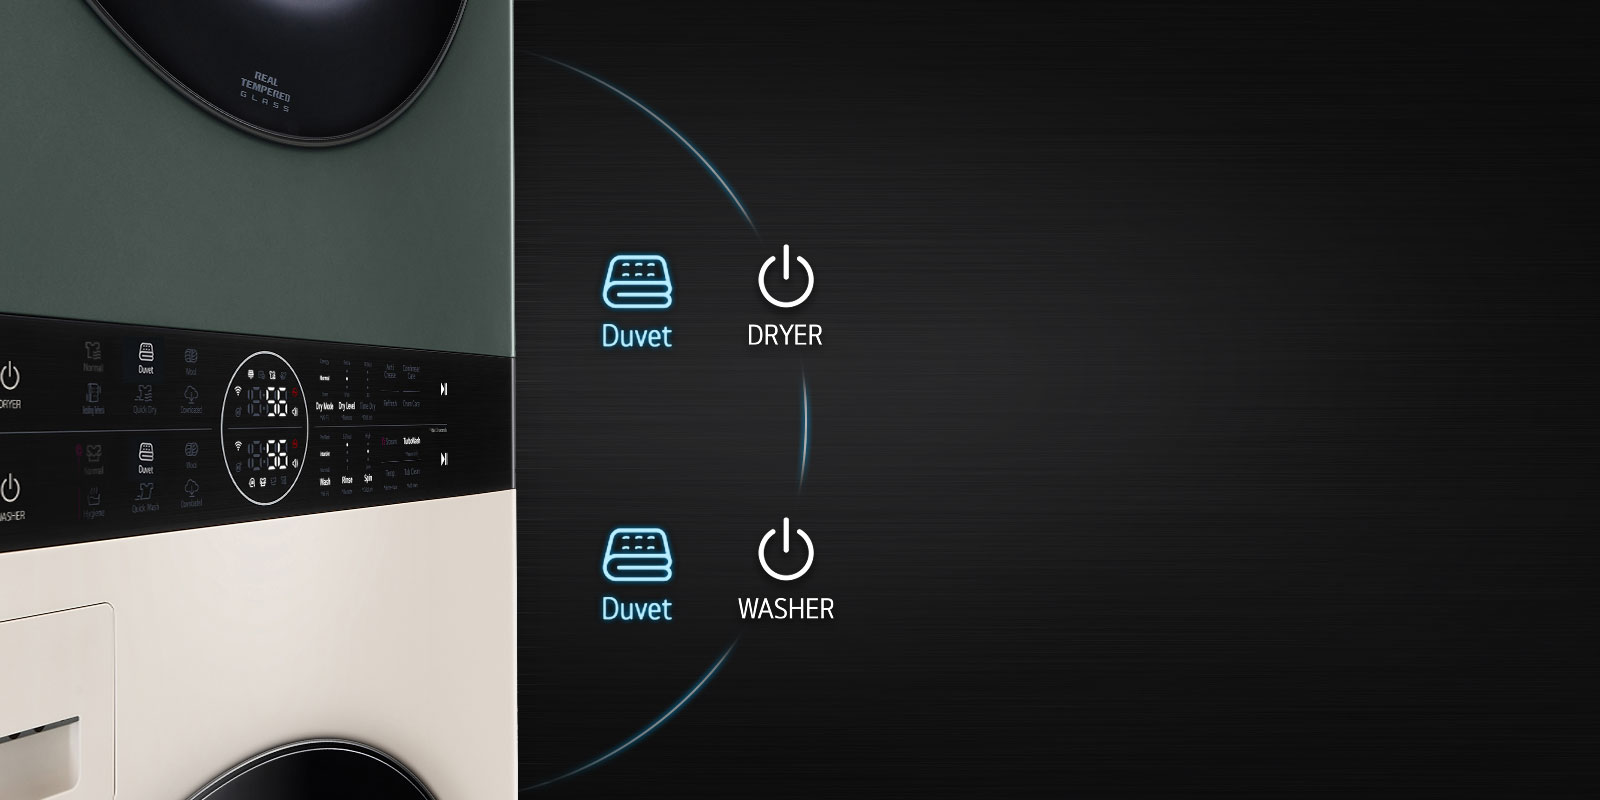 This is an image of the product panel. Dryer's Duvet button and Washer's Duvet button are highlighted.